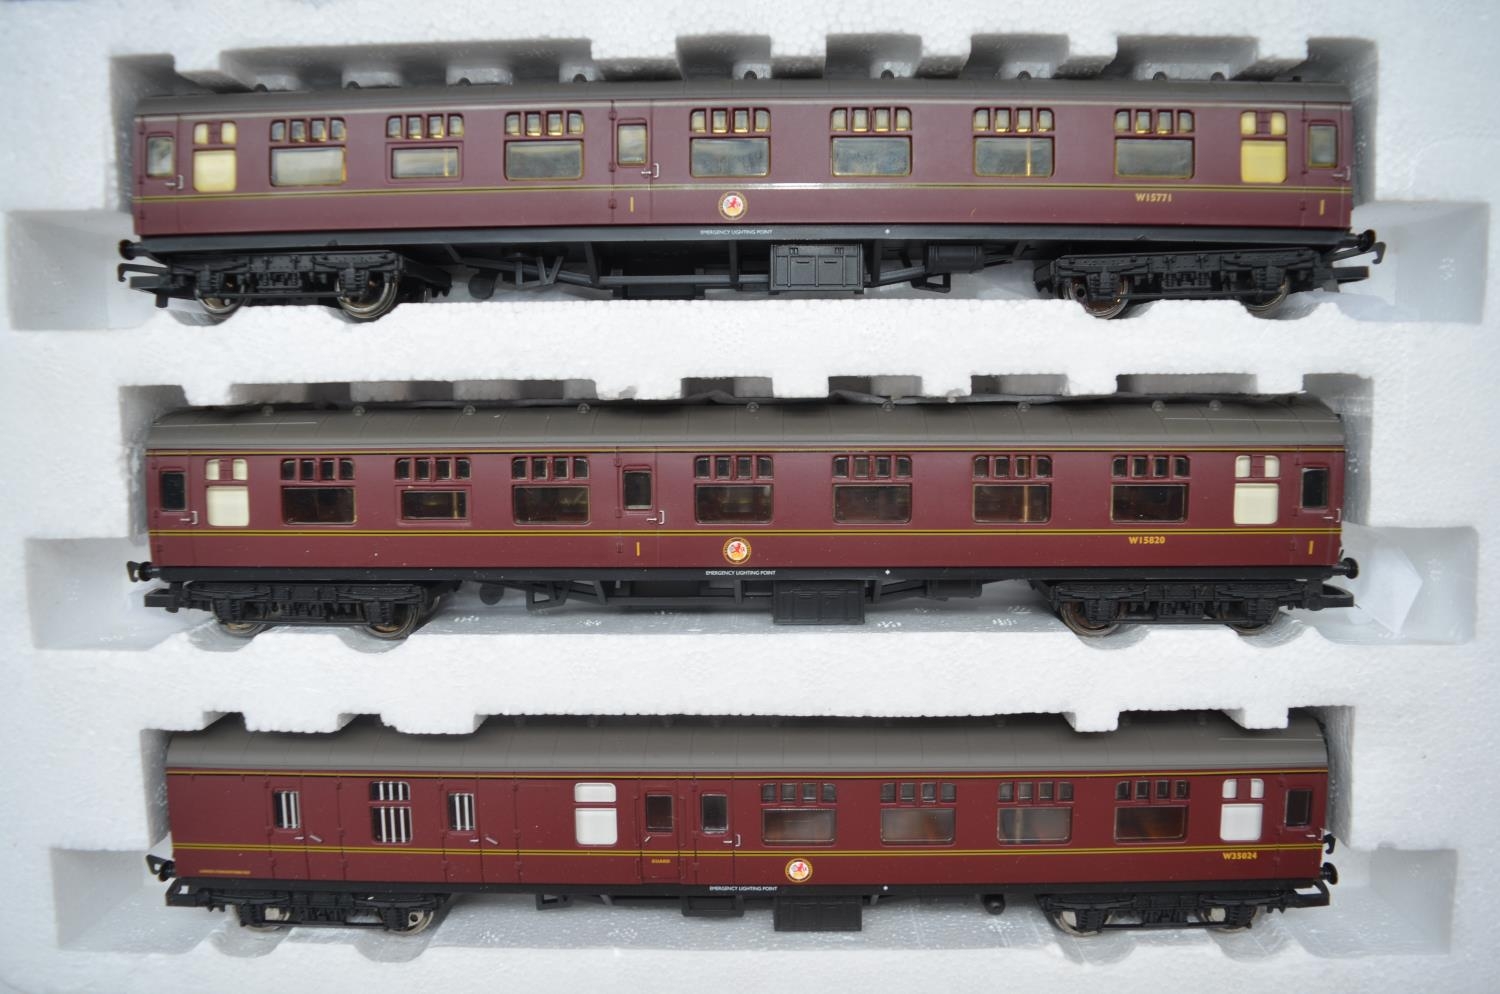 Incomplete Hornby OO gauge Evening Star electric train set, Locomotive damaged running gear (see